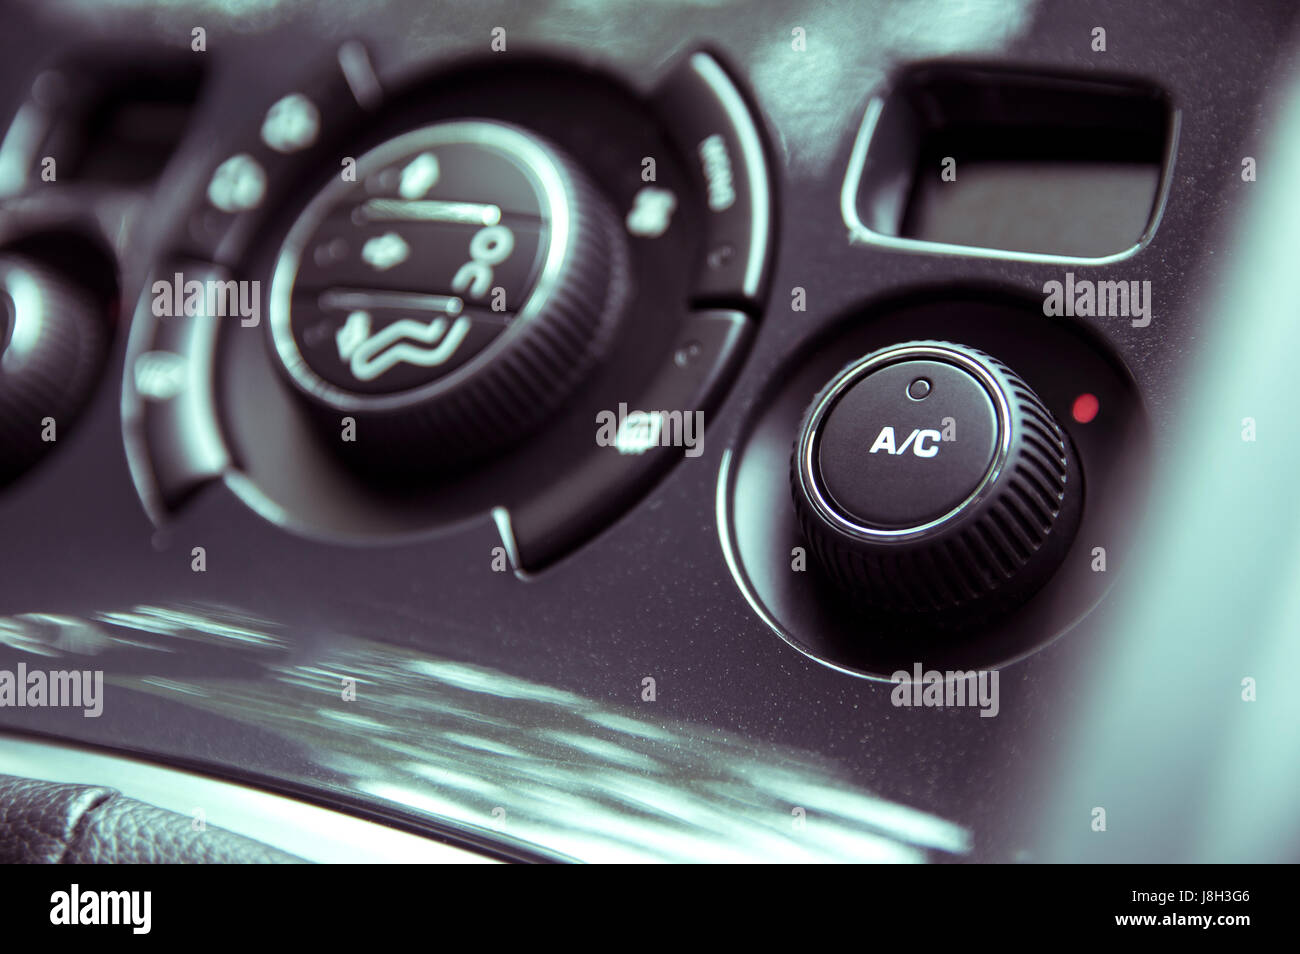 Air conditioning panel in a modern car Stock Photo